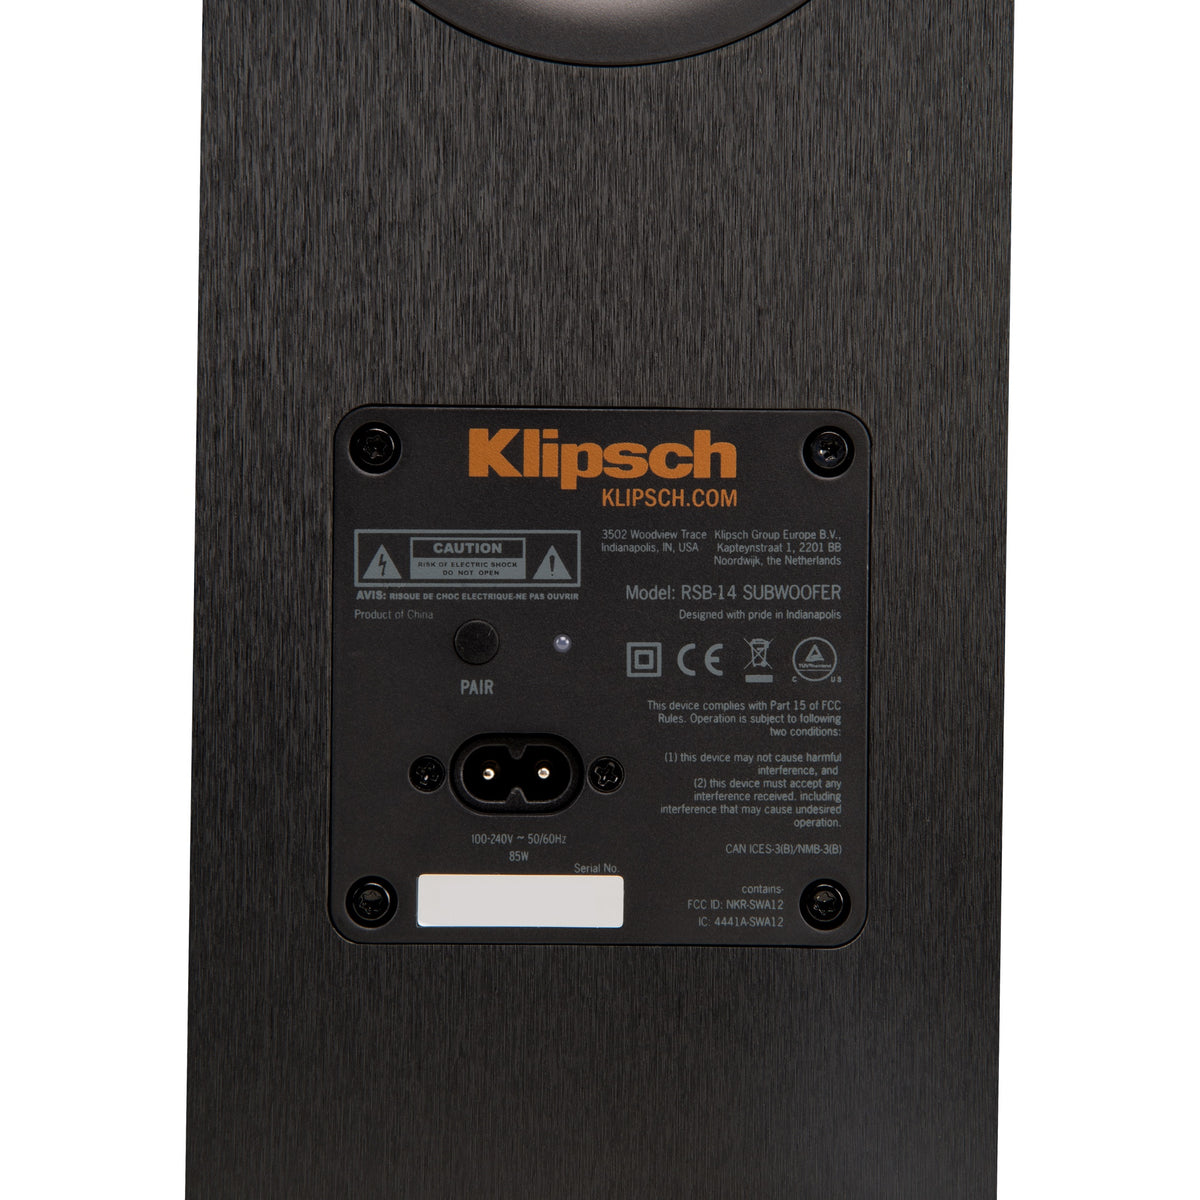 rear view of Klipsch Subwoofer for your home theater